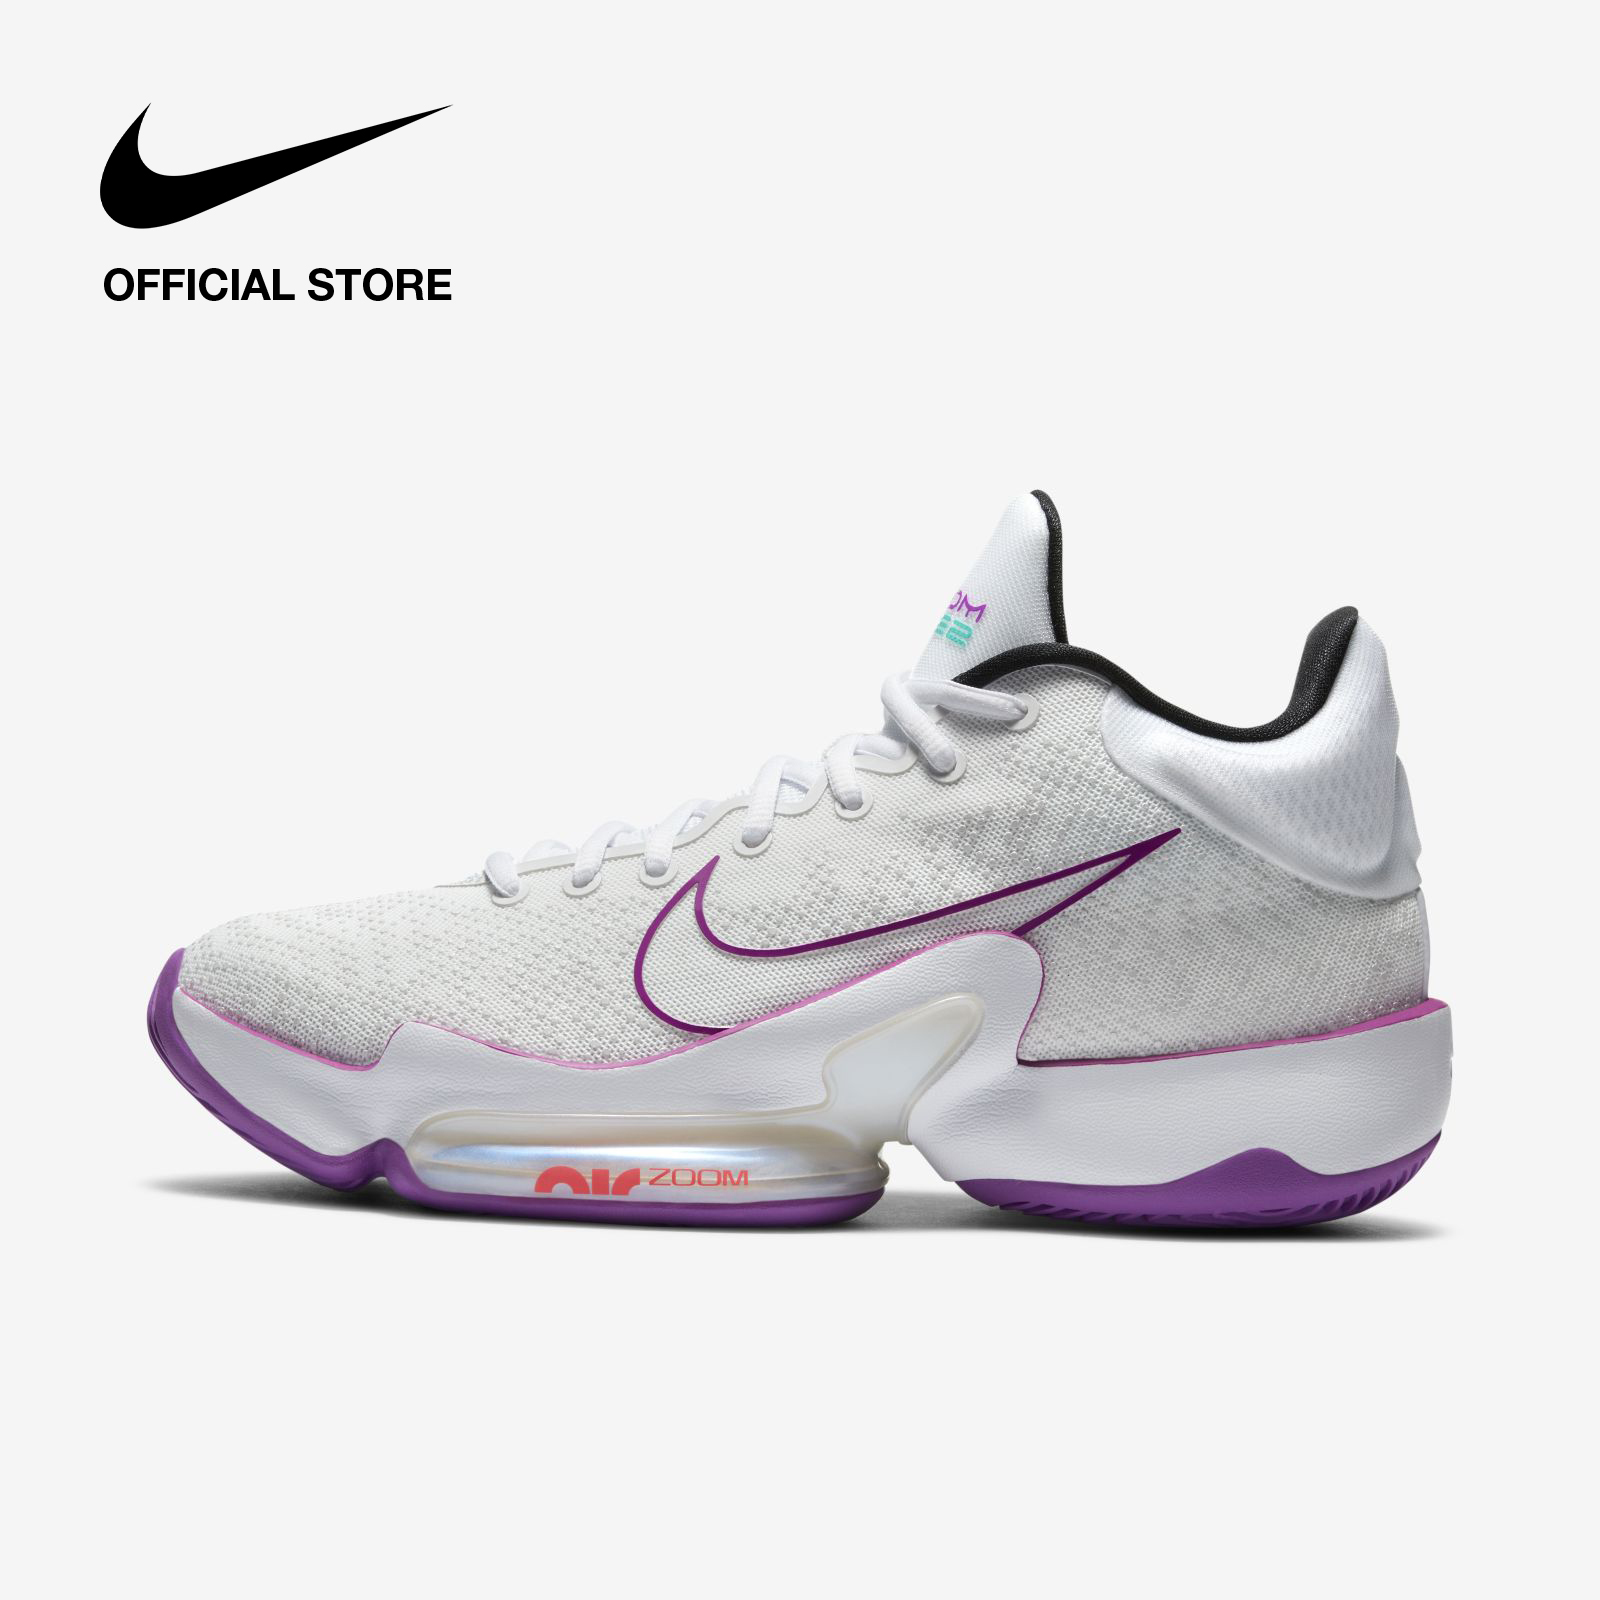 nike basketball shoes for sale philippines olx